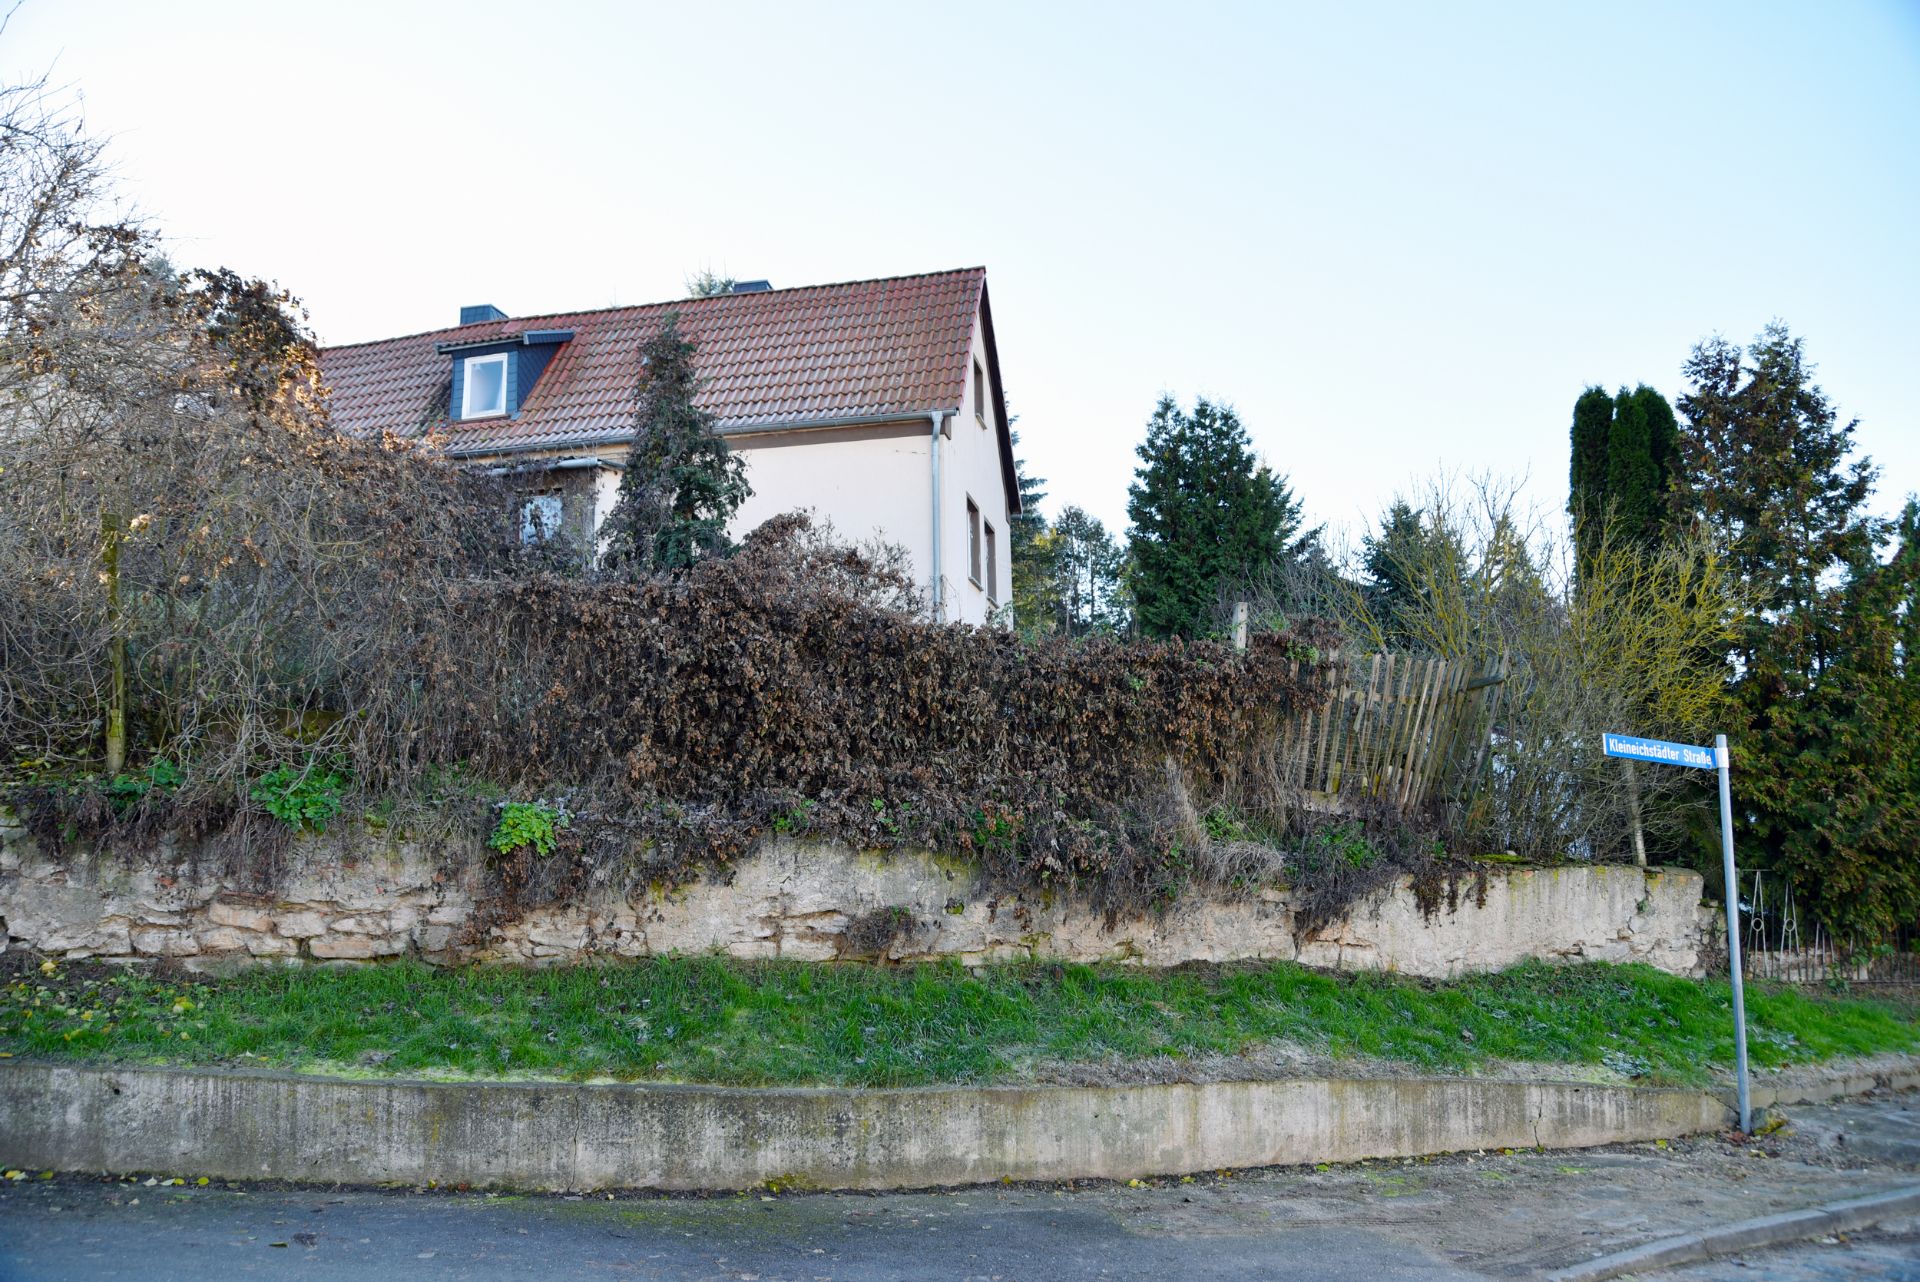 LARGE FREEHOLD HOUSE AND LAND IN SAXONY-ANHALT, GERMANY - Image 11 of 60